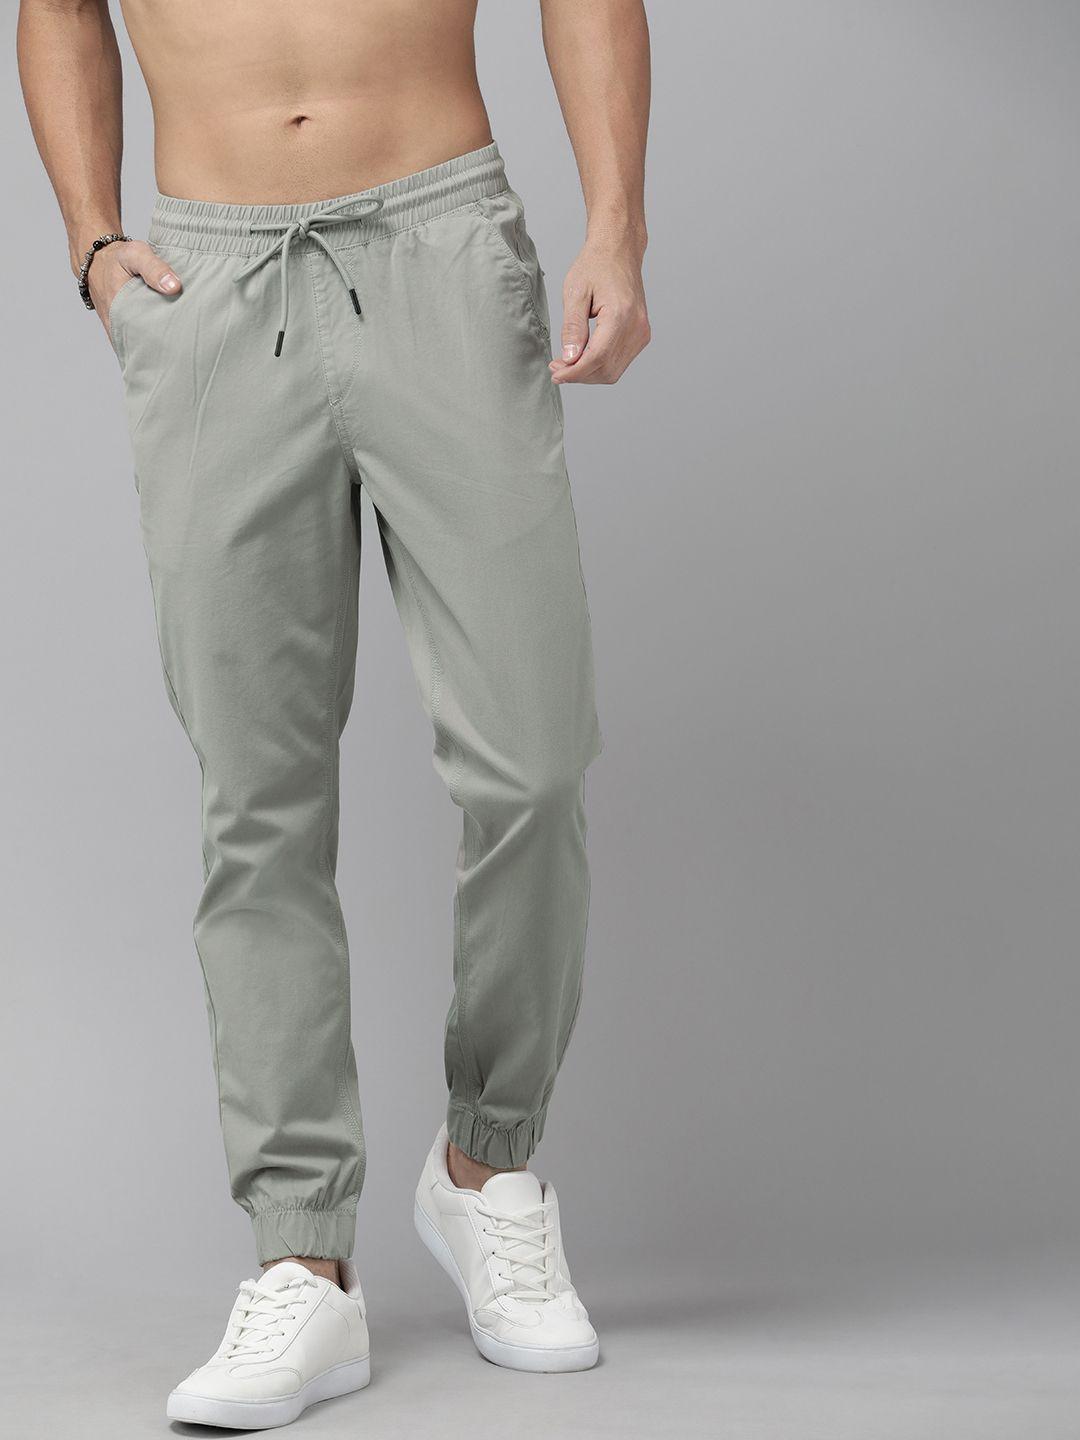 the roadster life co. men mid-rise joggers trousers with drawstring closure